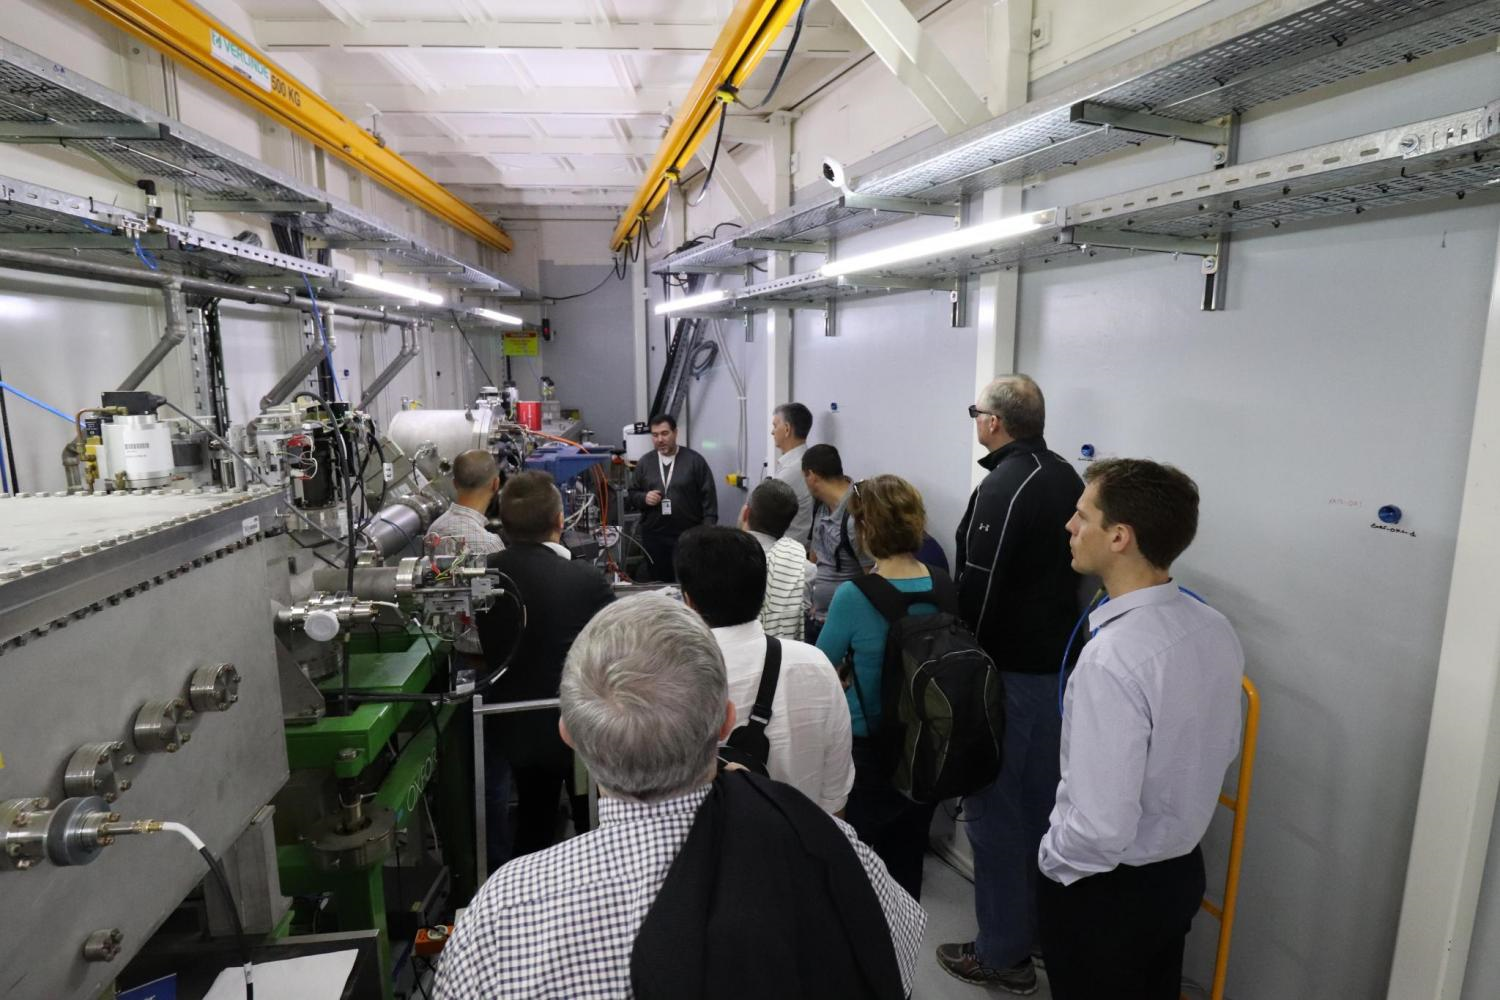  © SESAME 2019:  Tour at the SESAME’s beamline led by the Beamline Scientist. Dr. Messaoud Harfouche